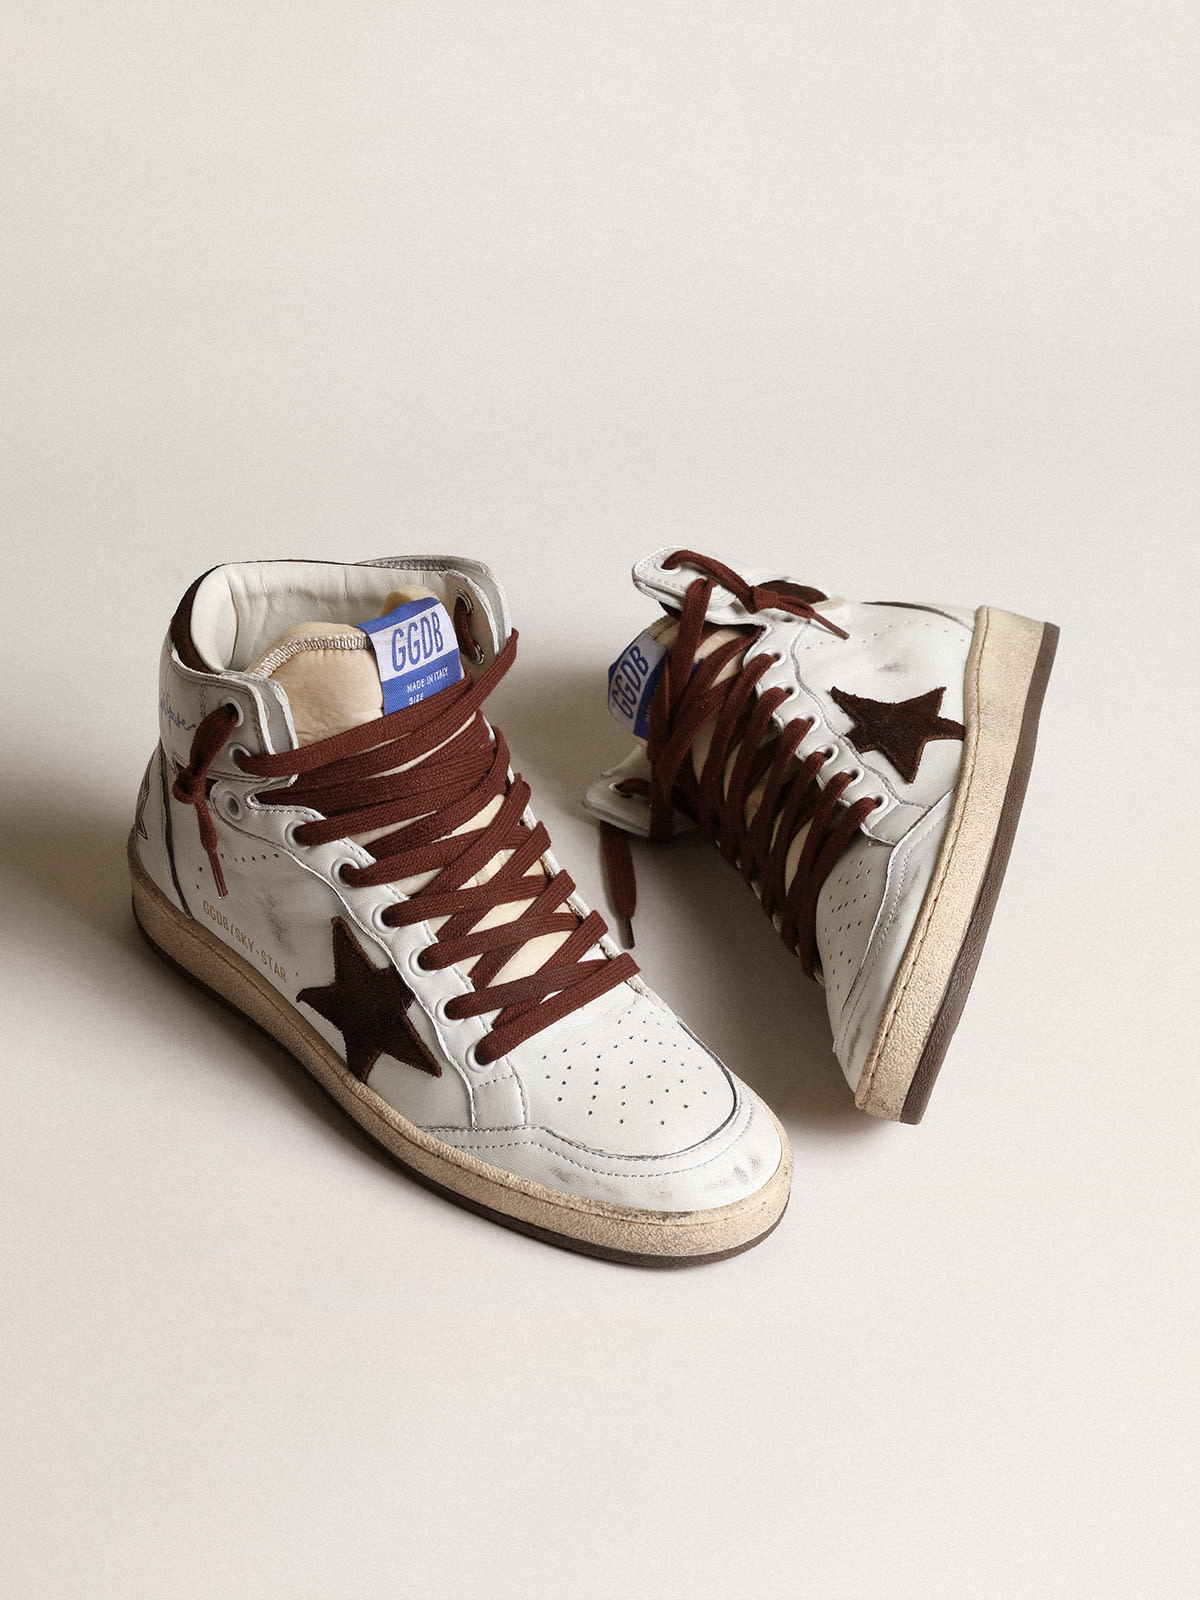 Golden Goose - Women’s Sky-Star in white nappa leather with chocolate suede star in 